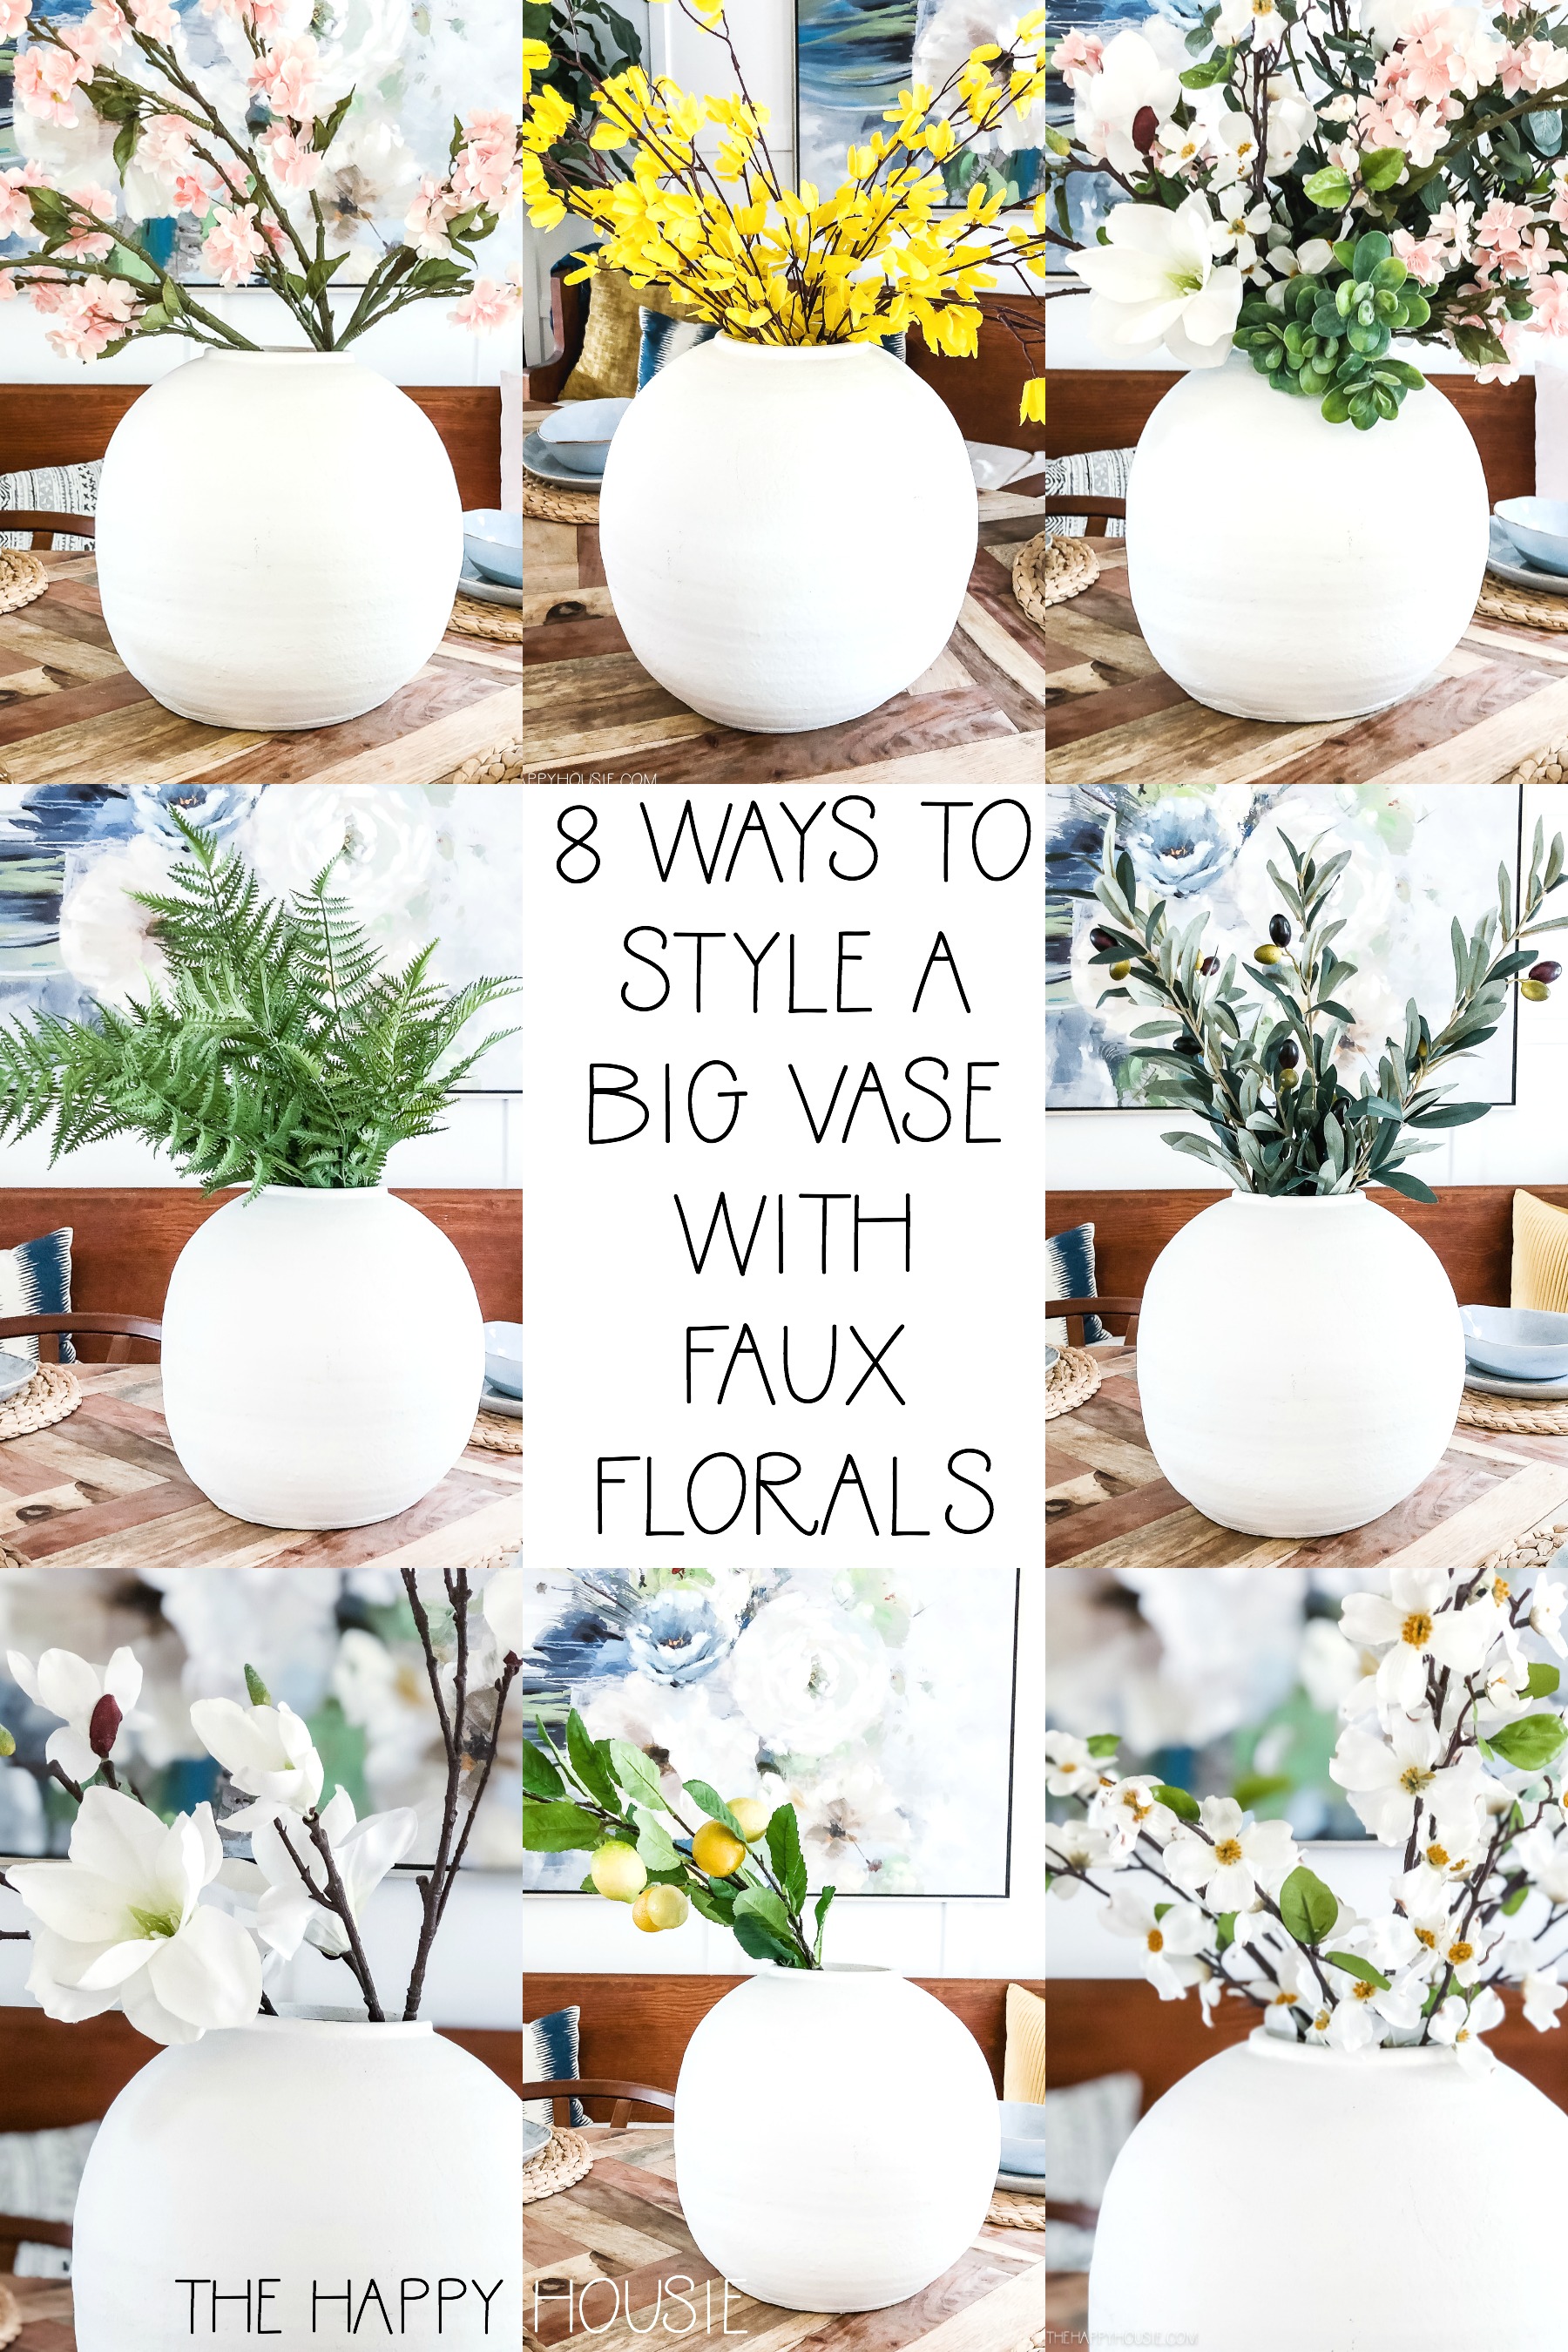 8 Ways To Style A Big Vase With Faux Florals graphic.